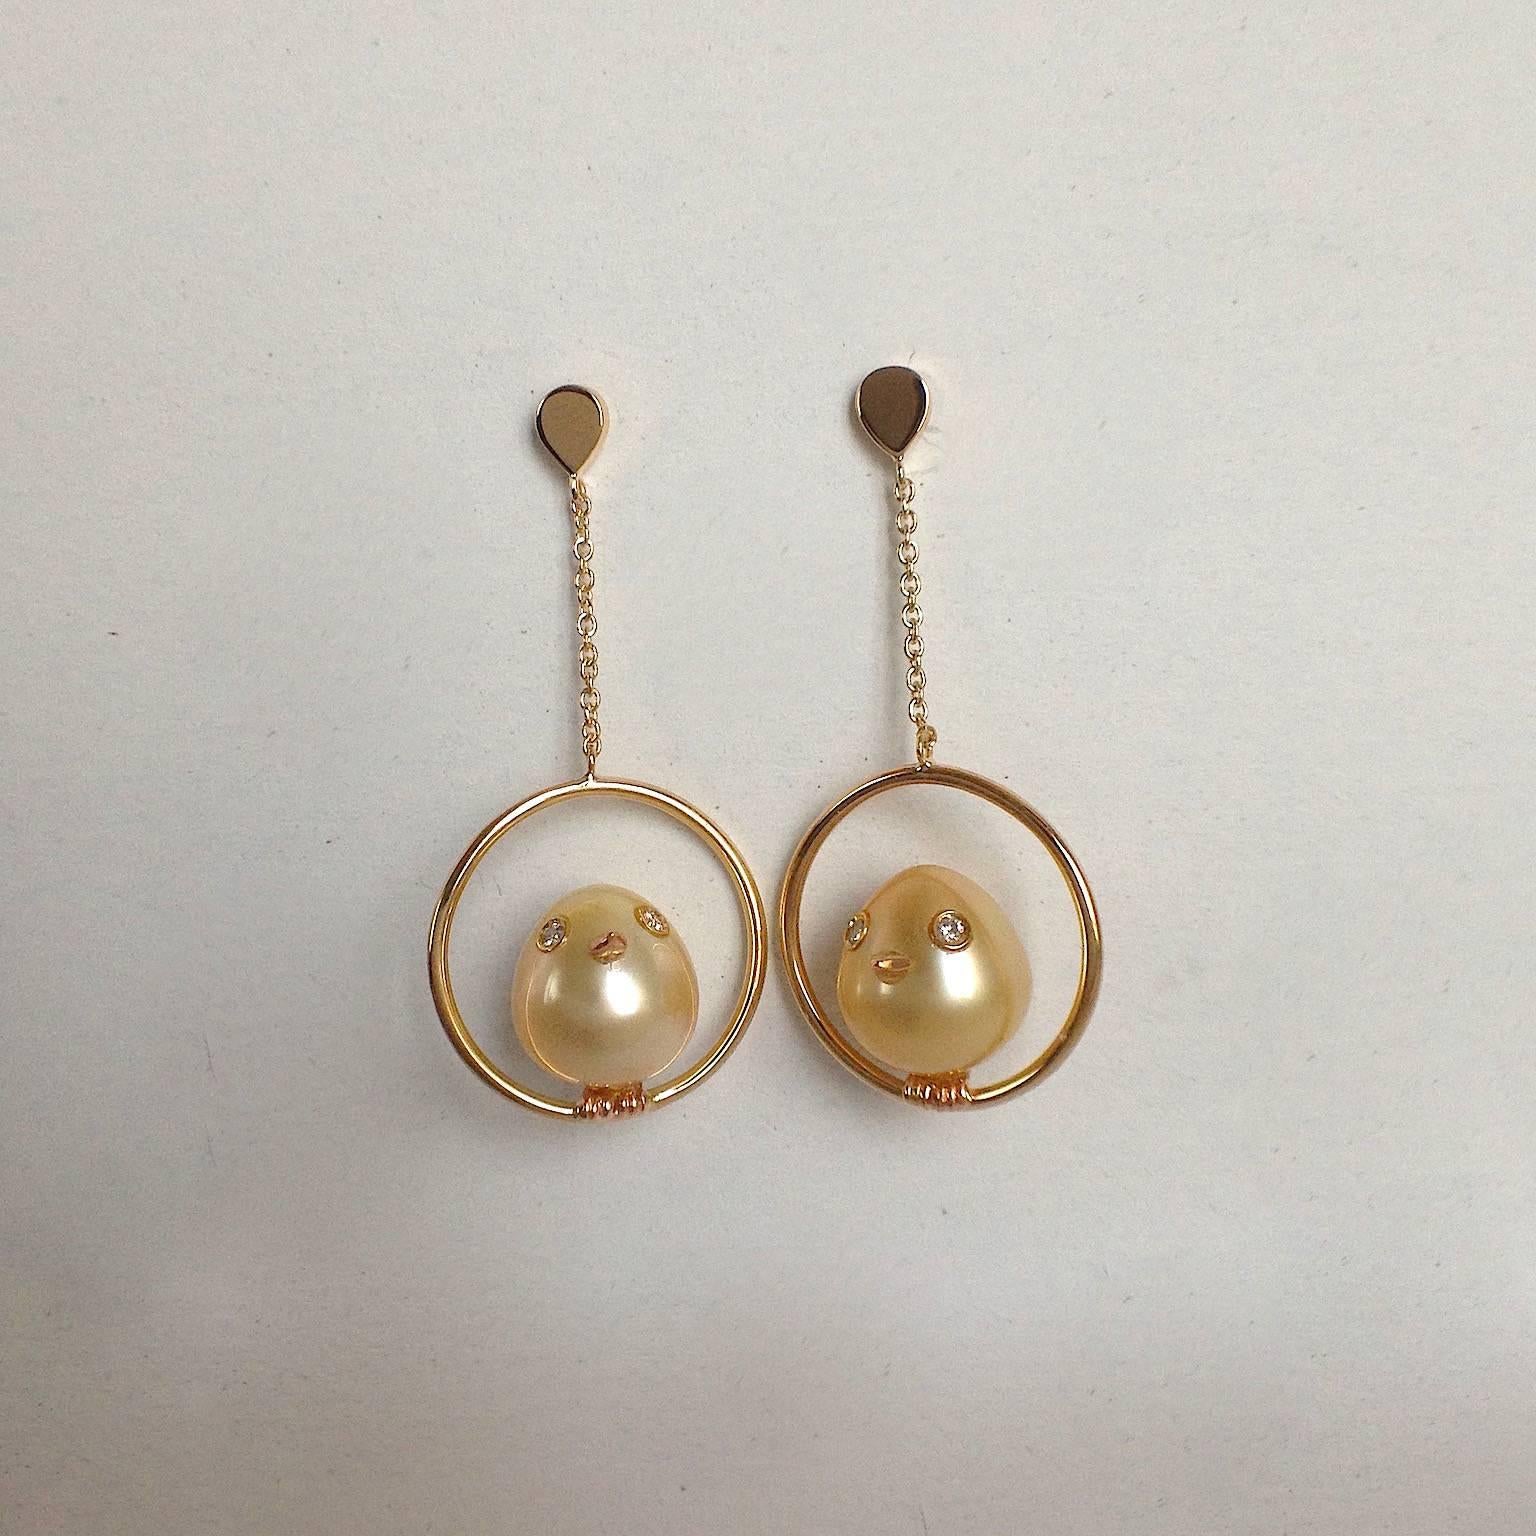 Bird Diamond South Sea Oval Pearl 18Kt Gold Drop Dangle Earrings Made in Italy
On these earring there are two gold Australian pearls. 
I put two white diamonds for its eyes, a red gold beak in each pearl  that with its tiny claws they are like two